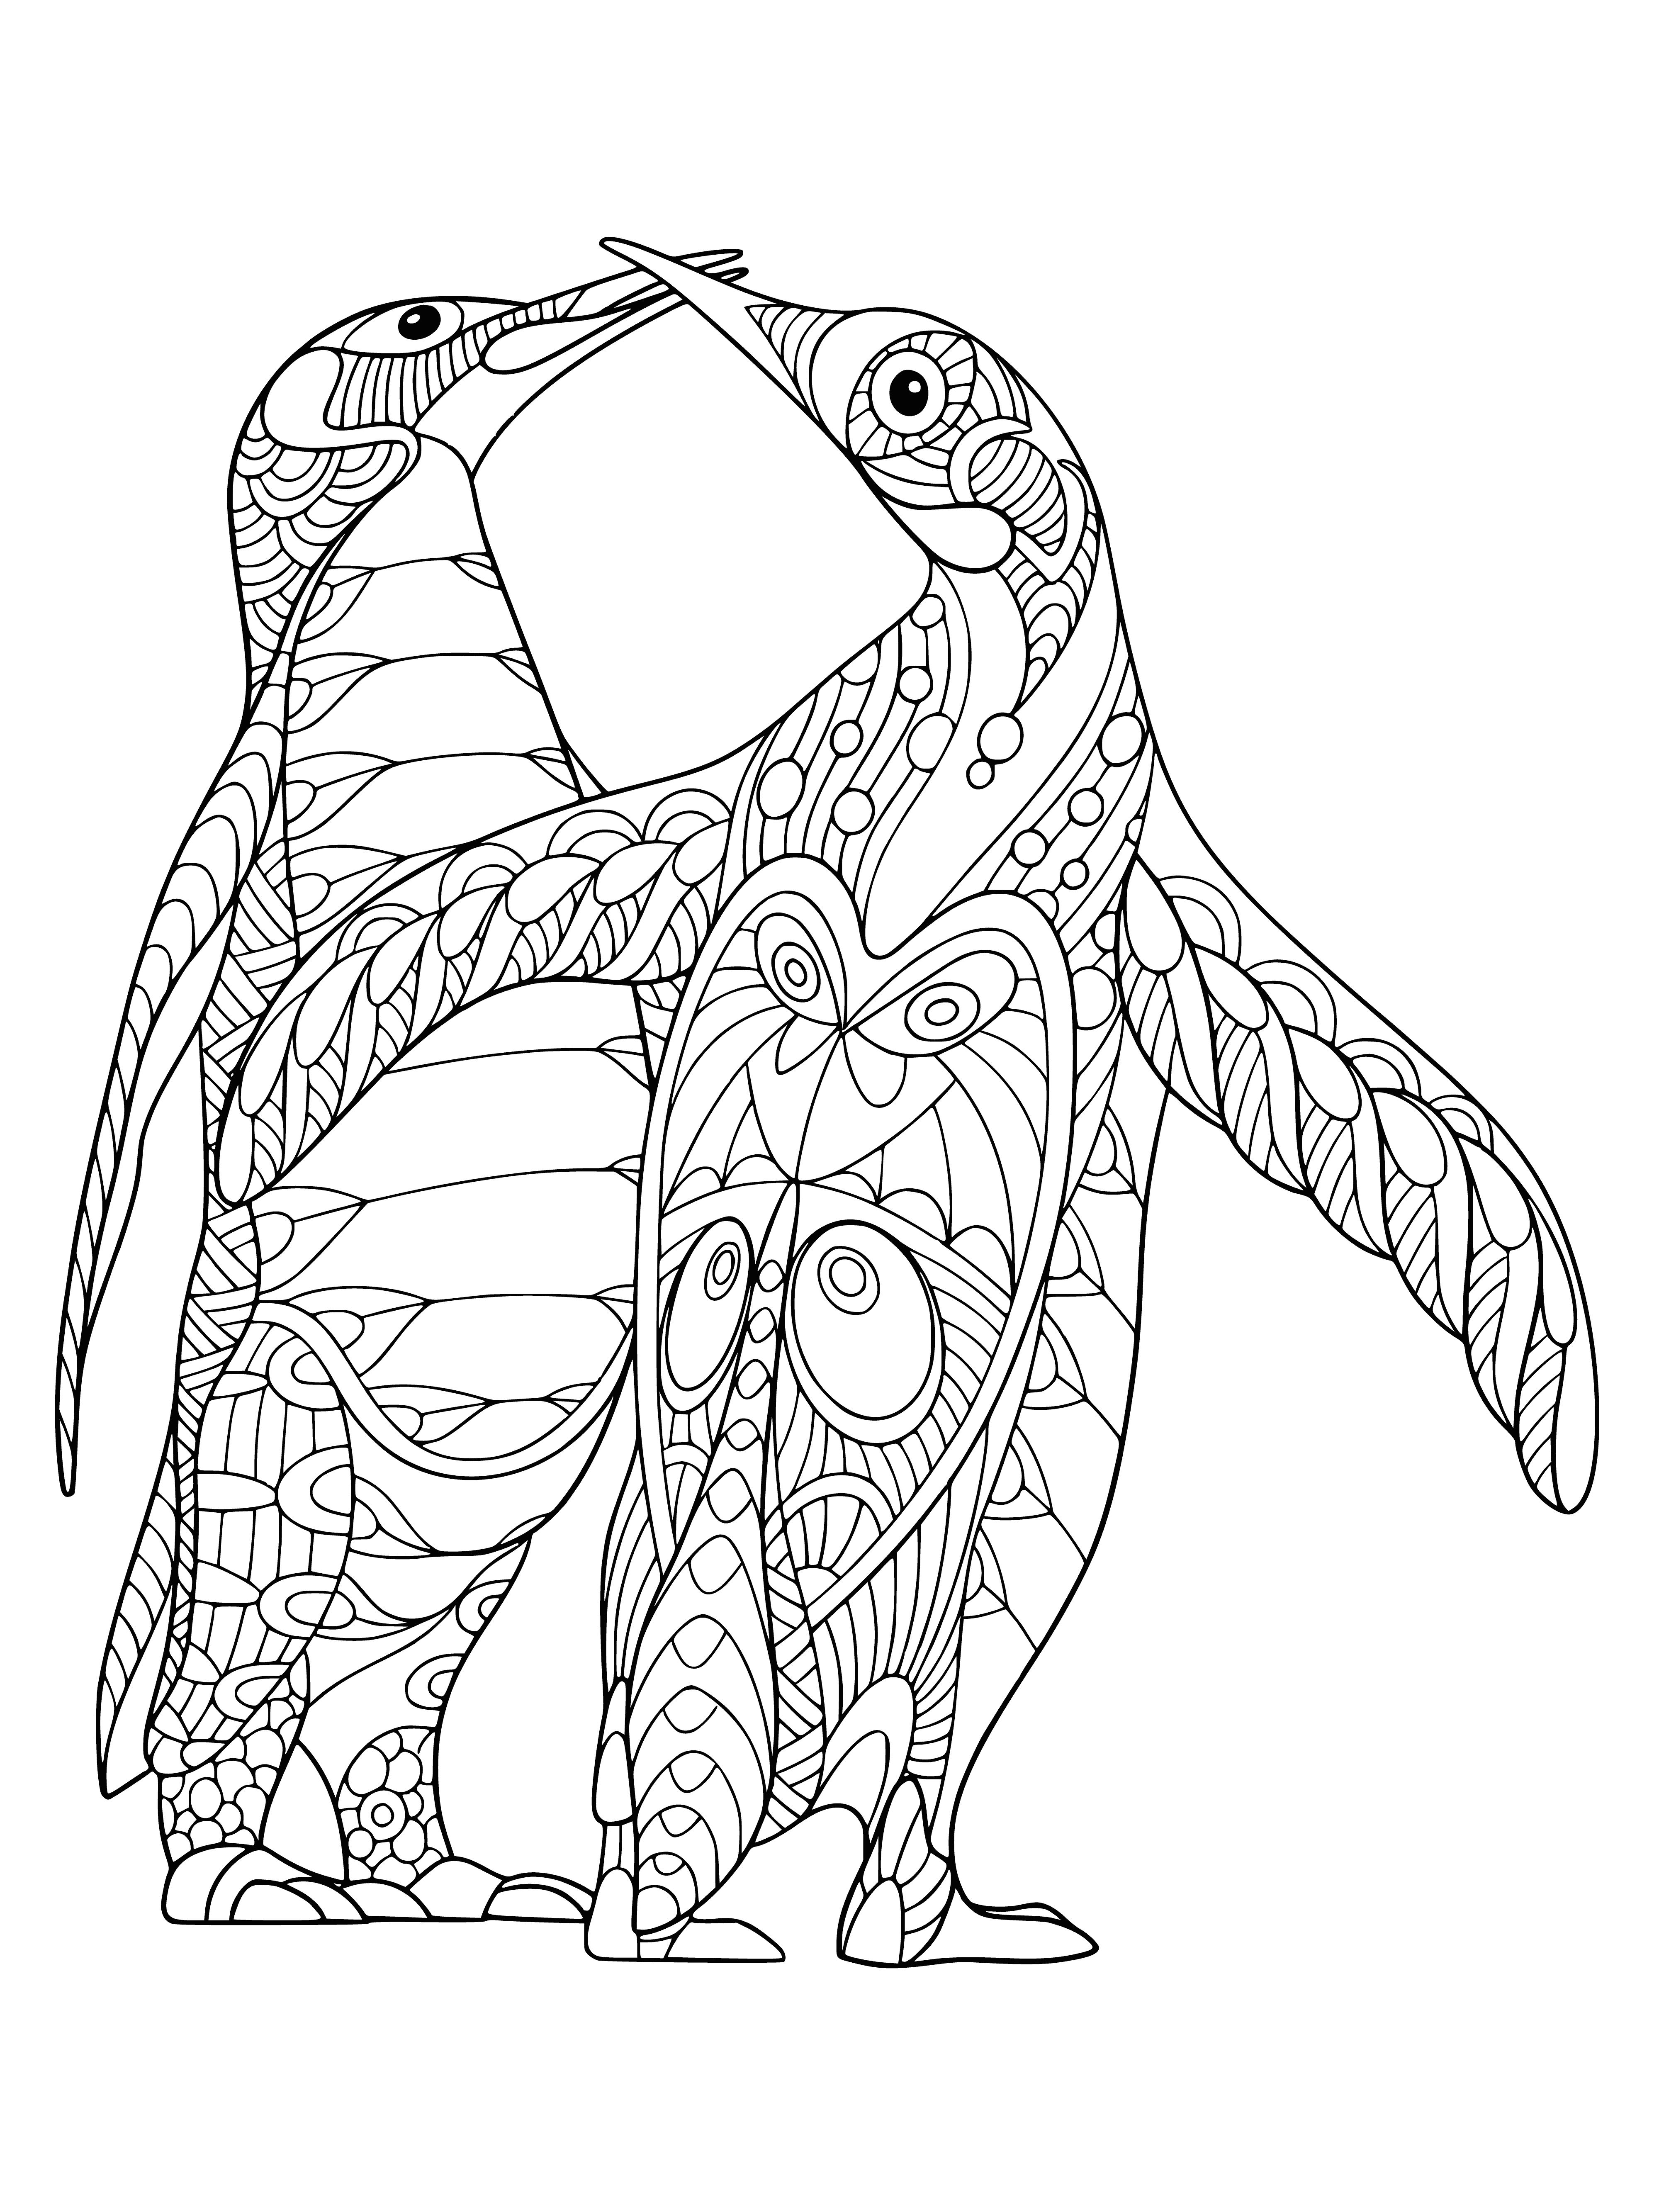 coloring page: Two penguins swim in the ocean with their wings outstretched, surrounded by fish. #ColoringPages #Penguins #AntistressBirds